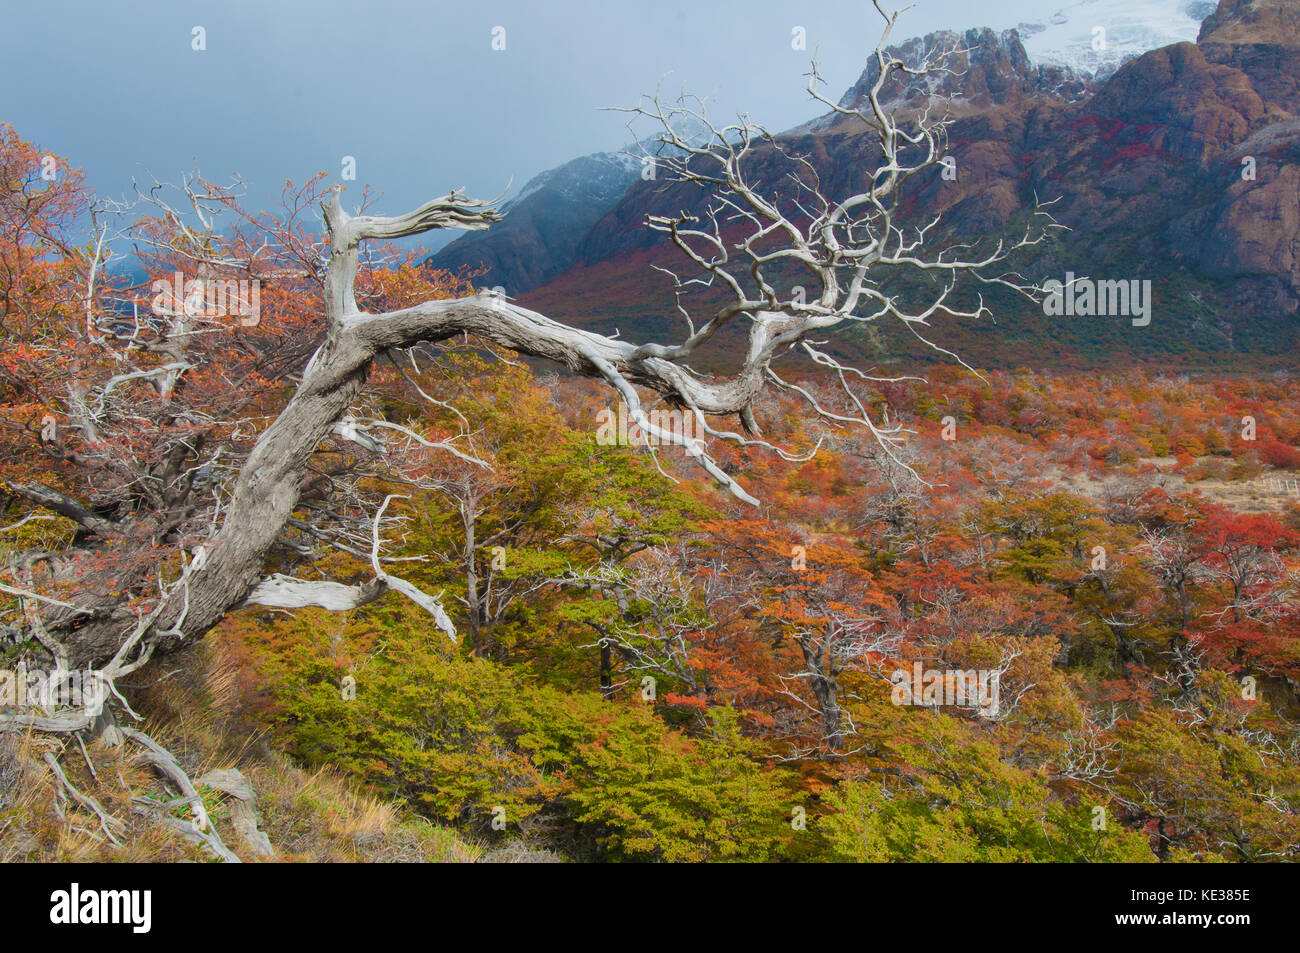 Southern beeches (Nothofagus) in autumn, Los Glaciares National Park, southern Argentina Stock Photo